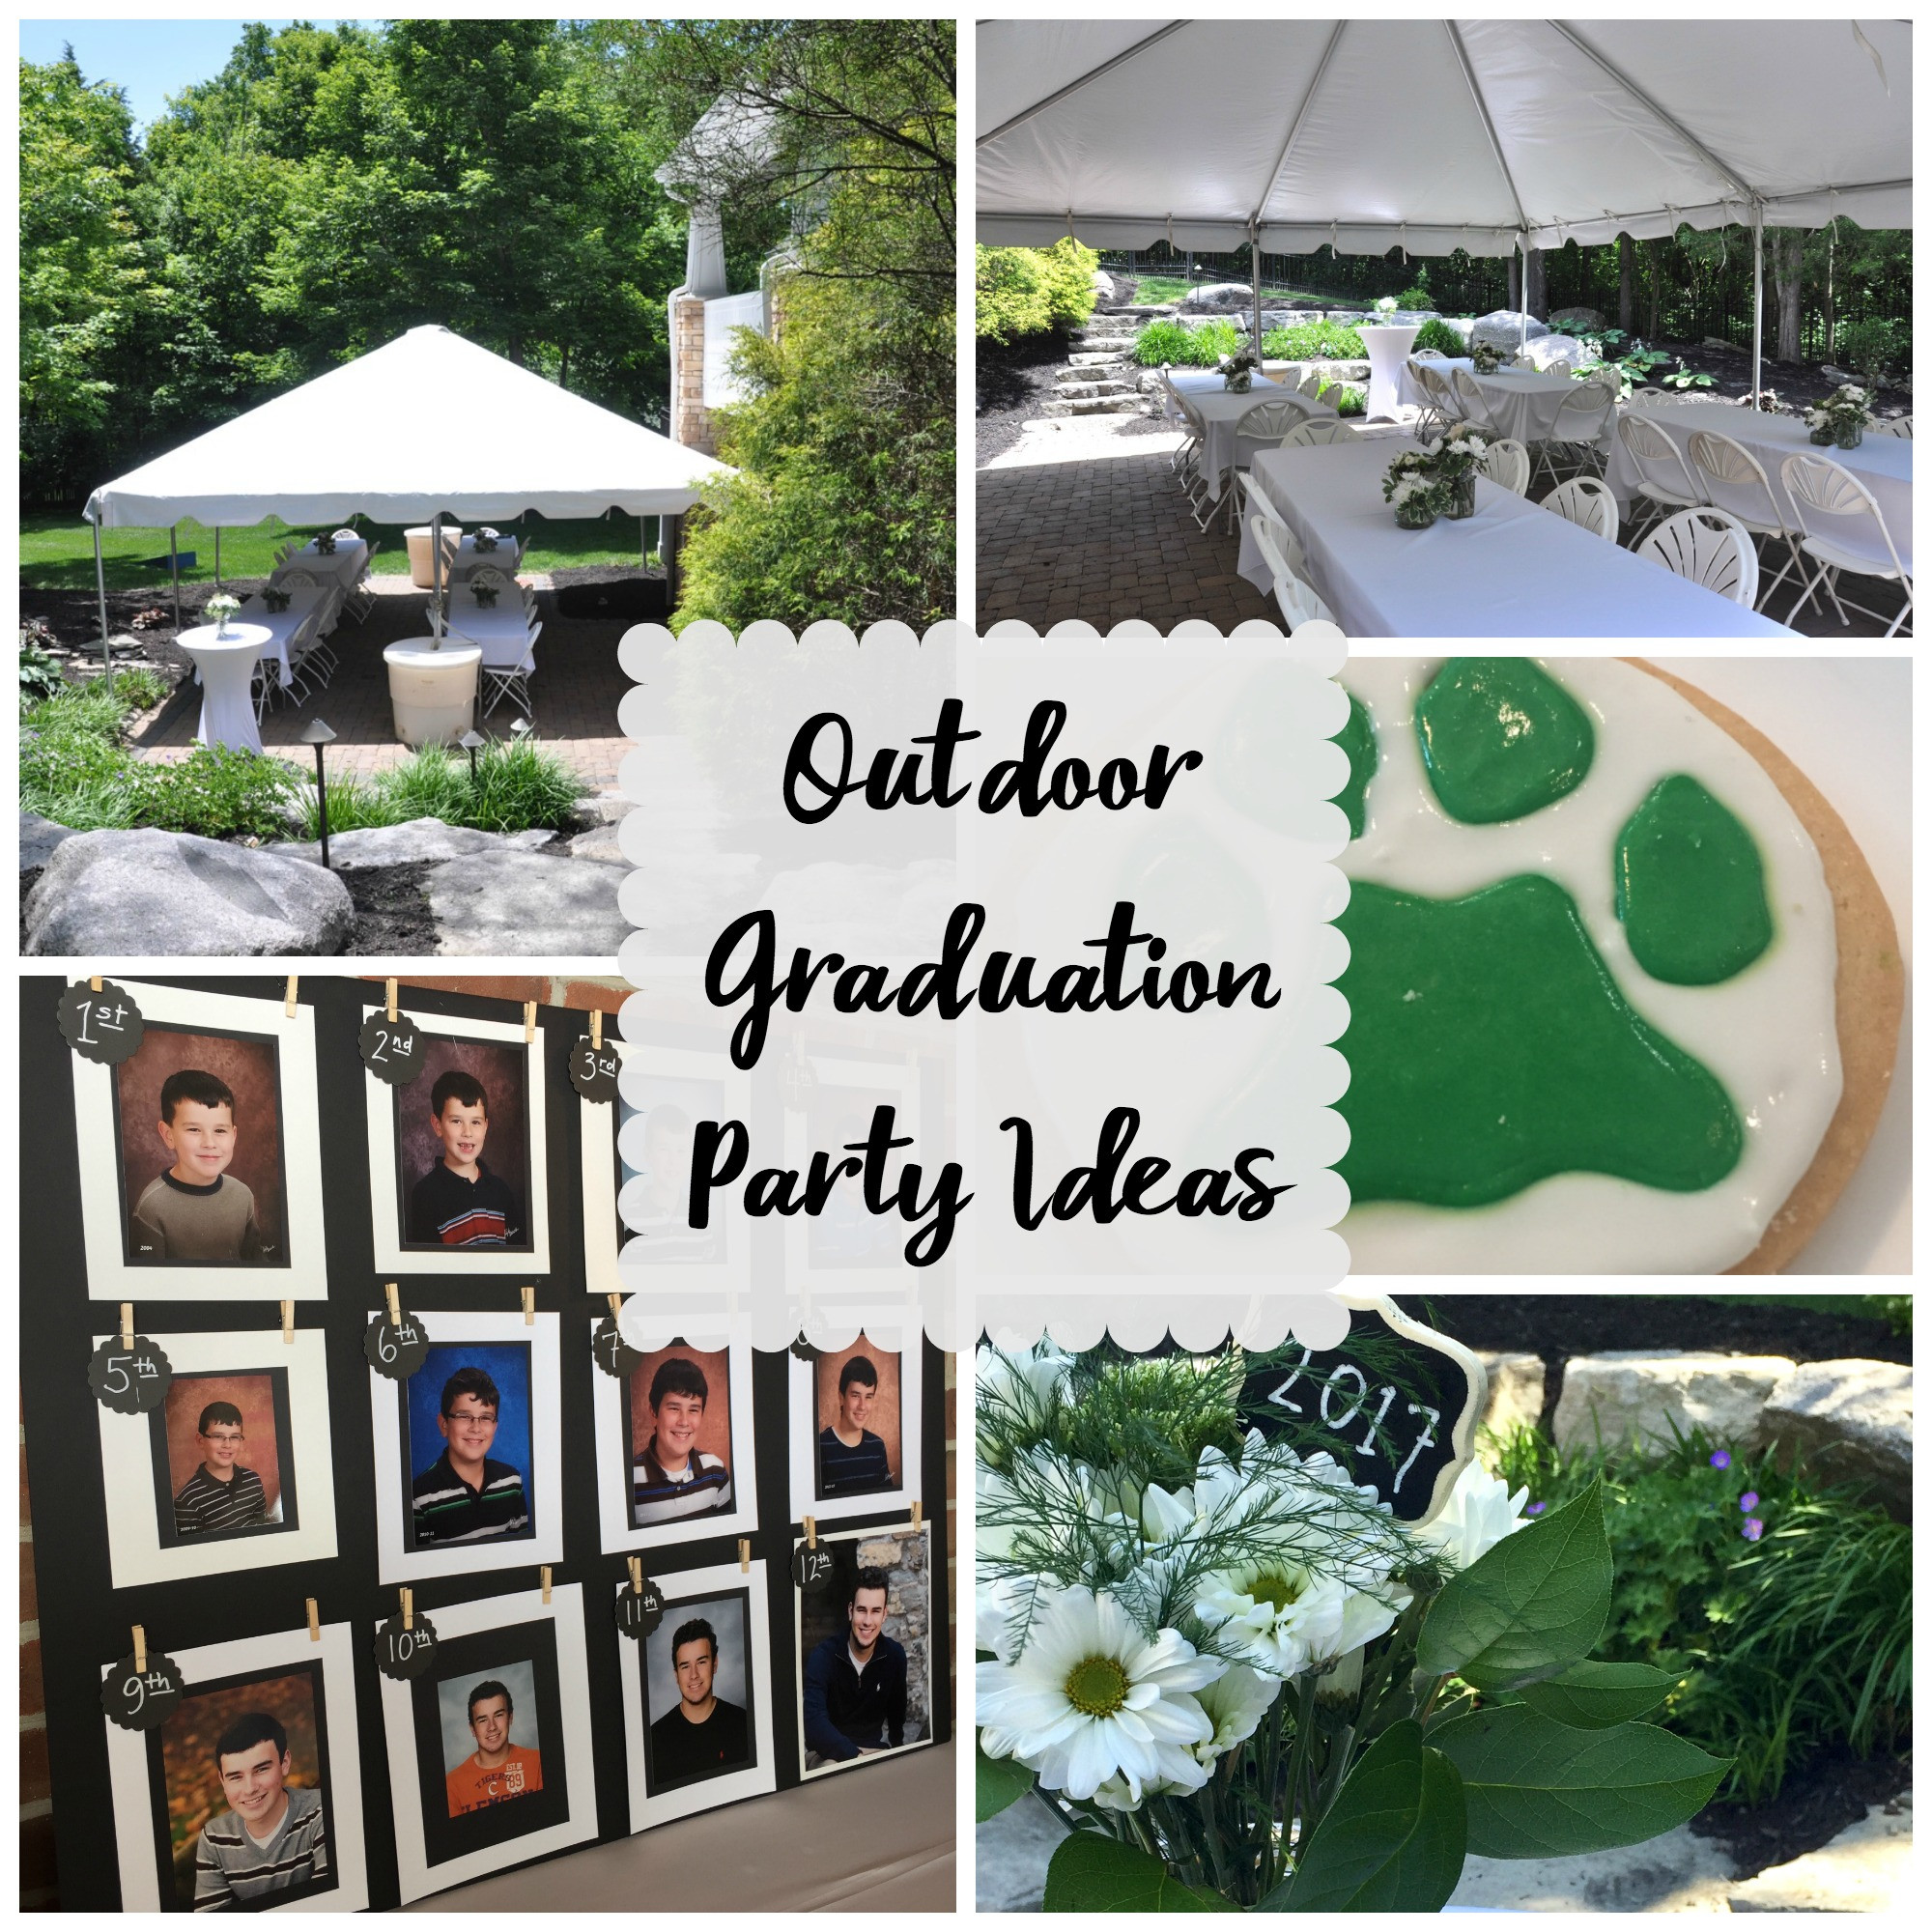 Backyard Graduation Party Decorating Ideas
 Outdoor Graduation Party Evolution of Style